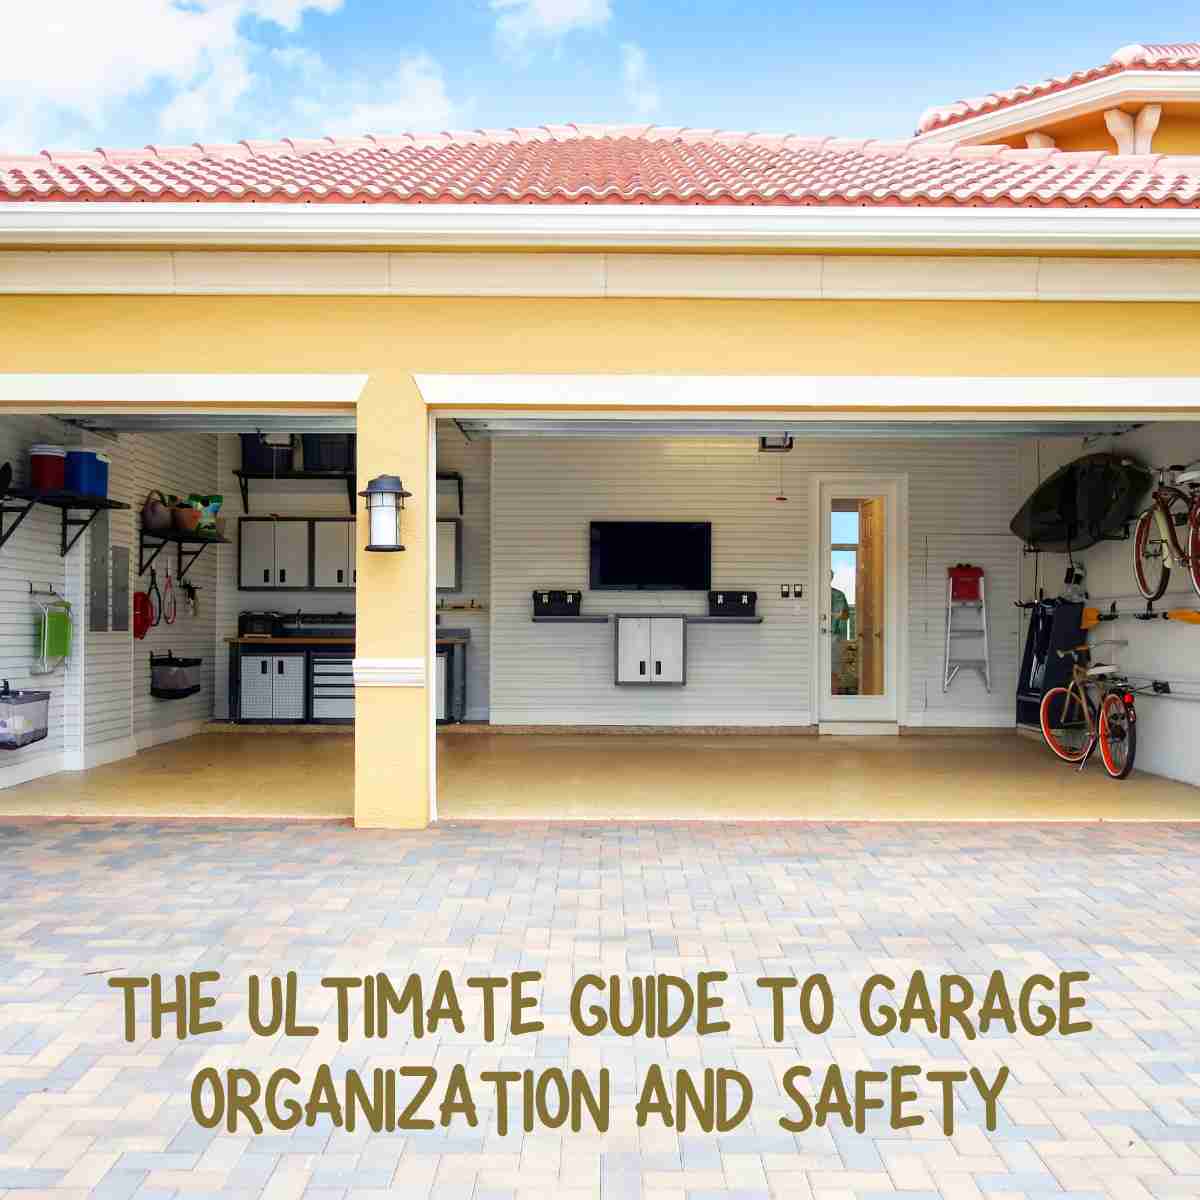 The Ultimate Guide to Garage Organization and Safety